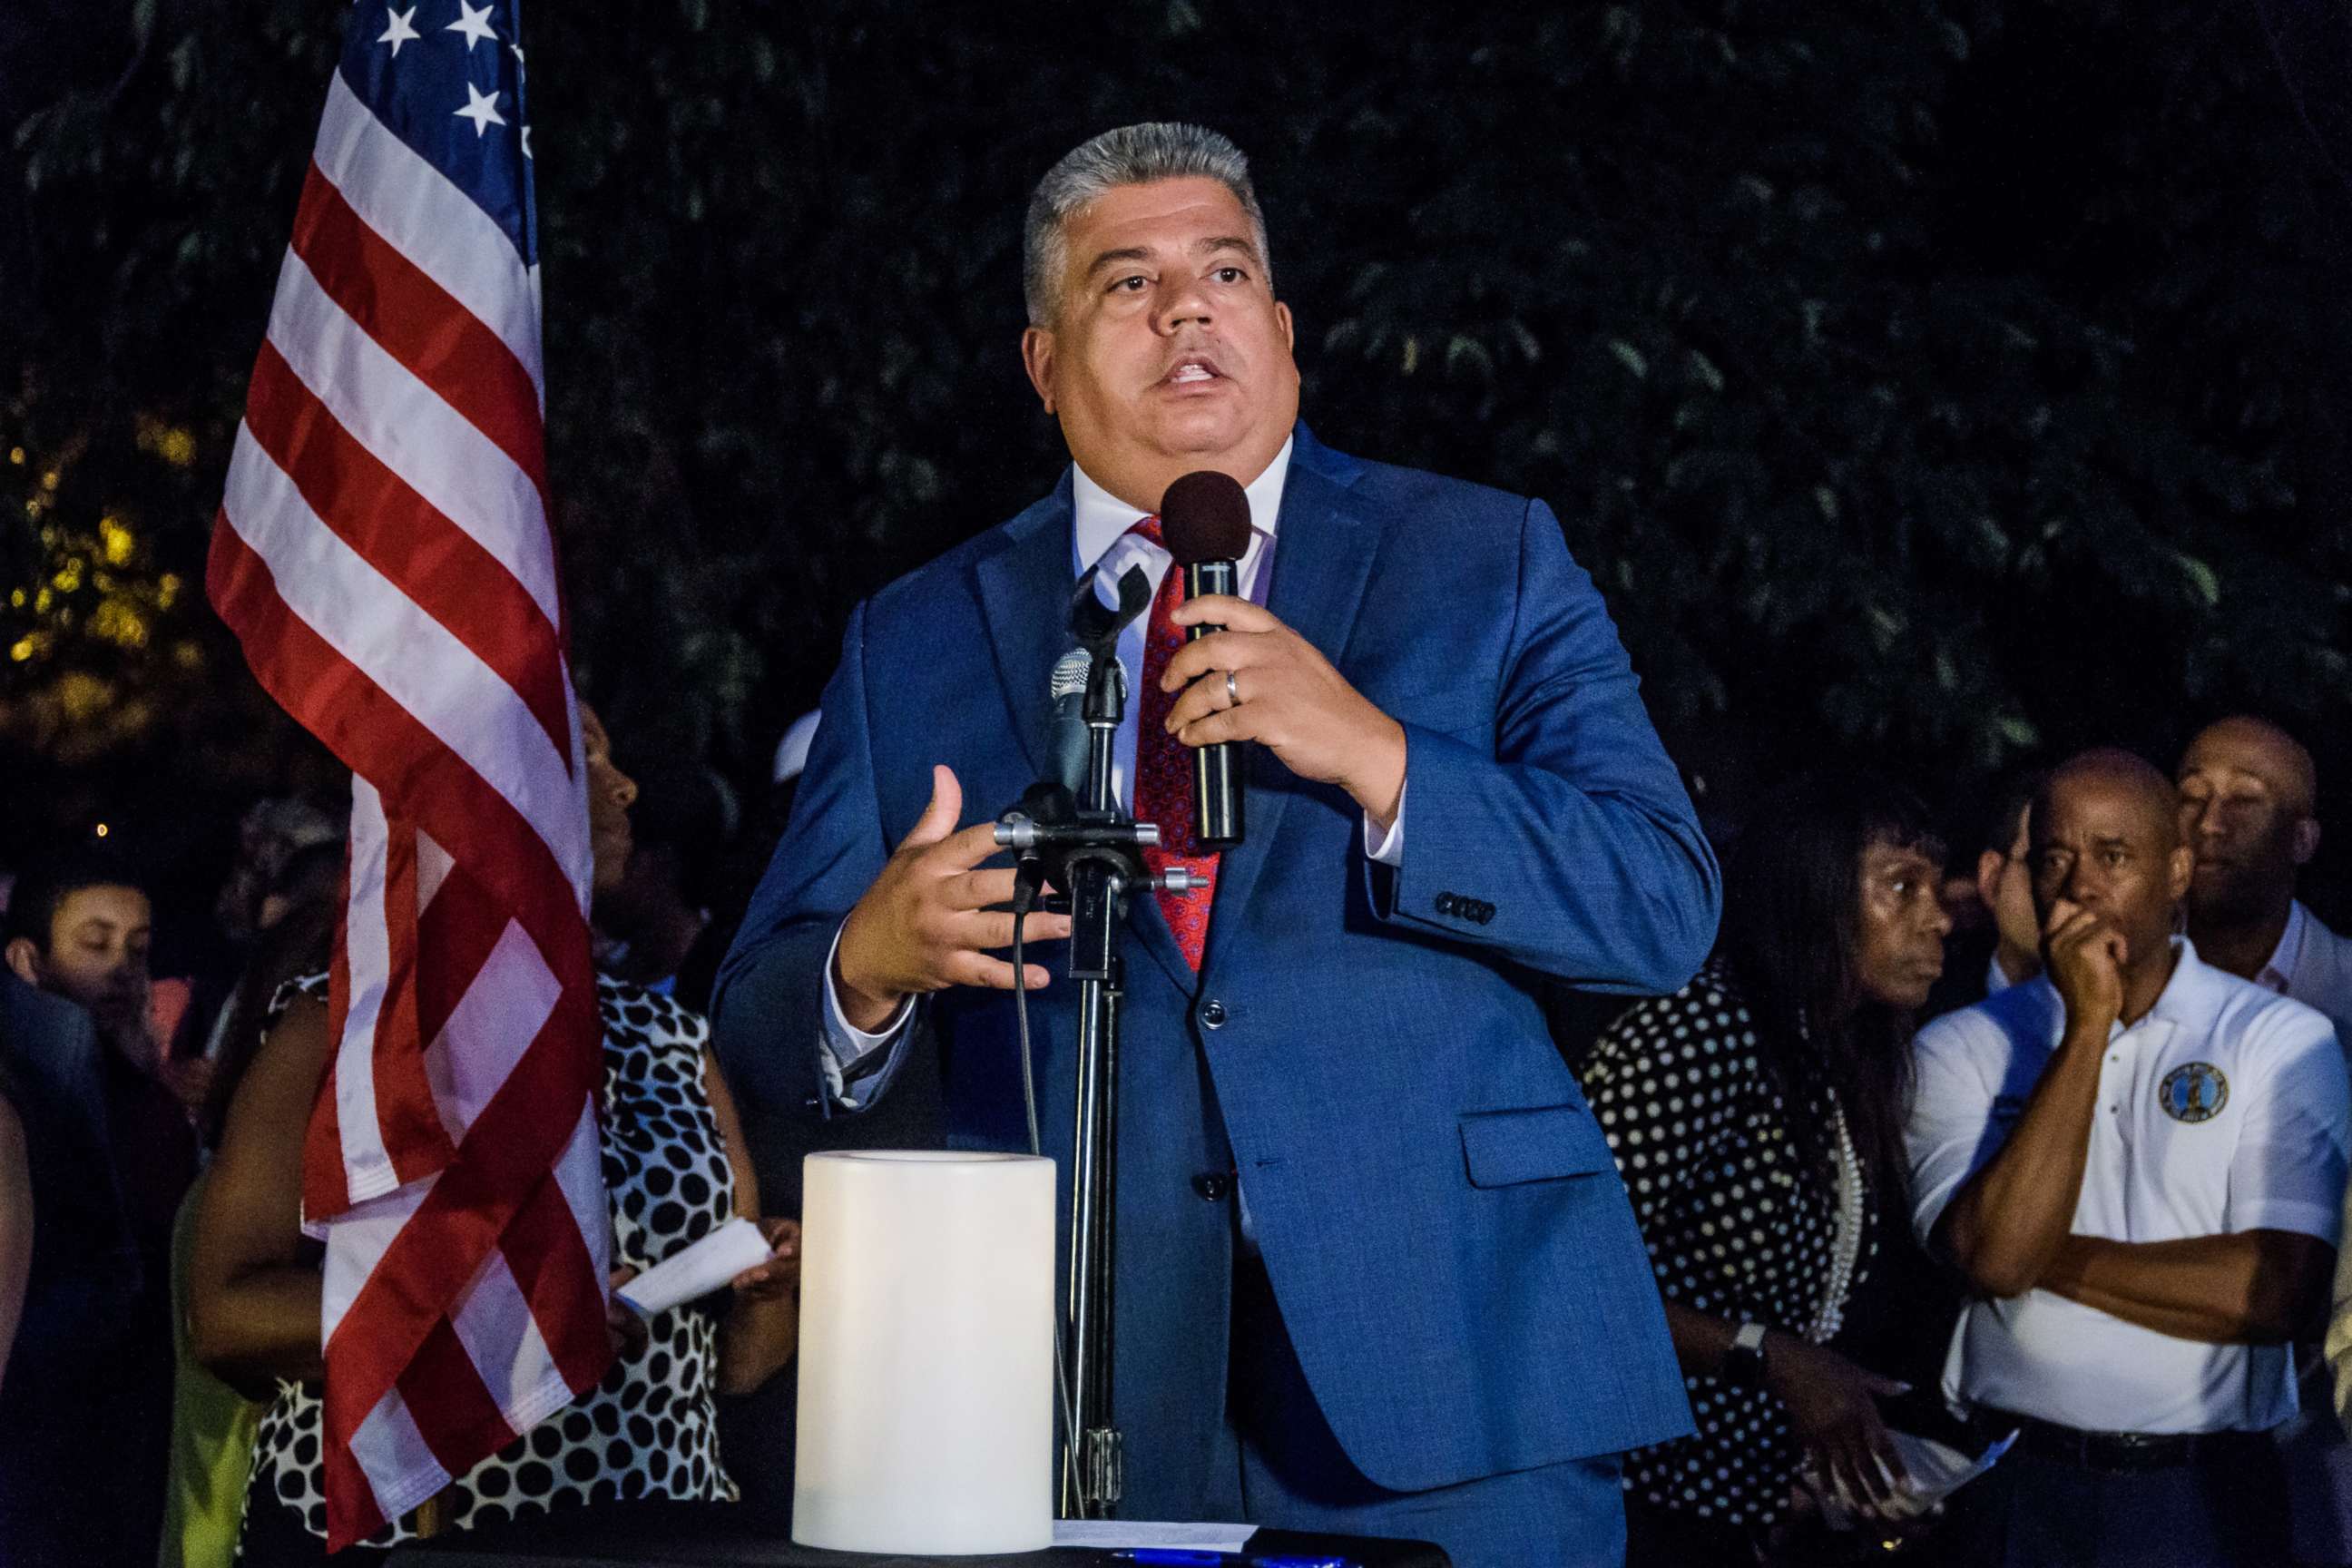 PHOTO: Brooklyn District Attorney Eric Gonzalez speaks at an event, Aug. 8, 2019 in the Brooklyn borough of New York City.